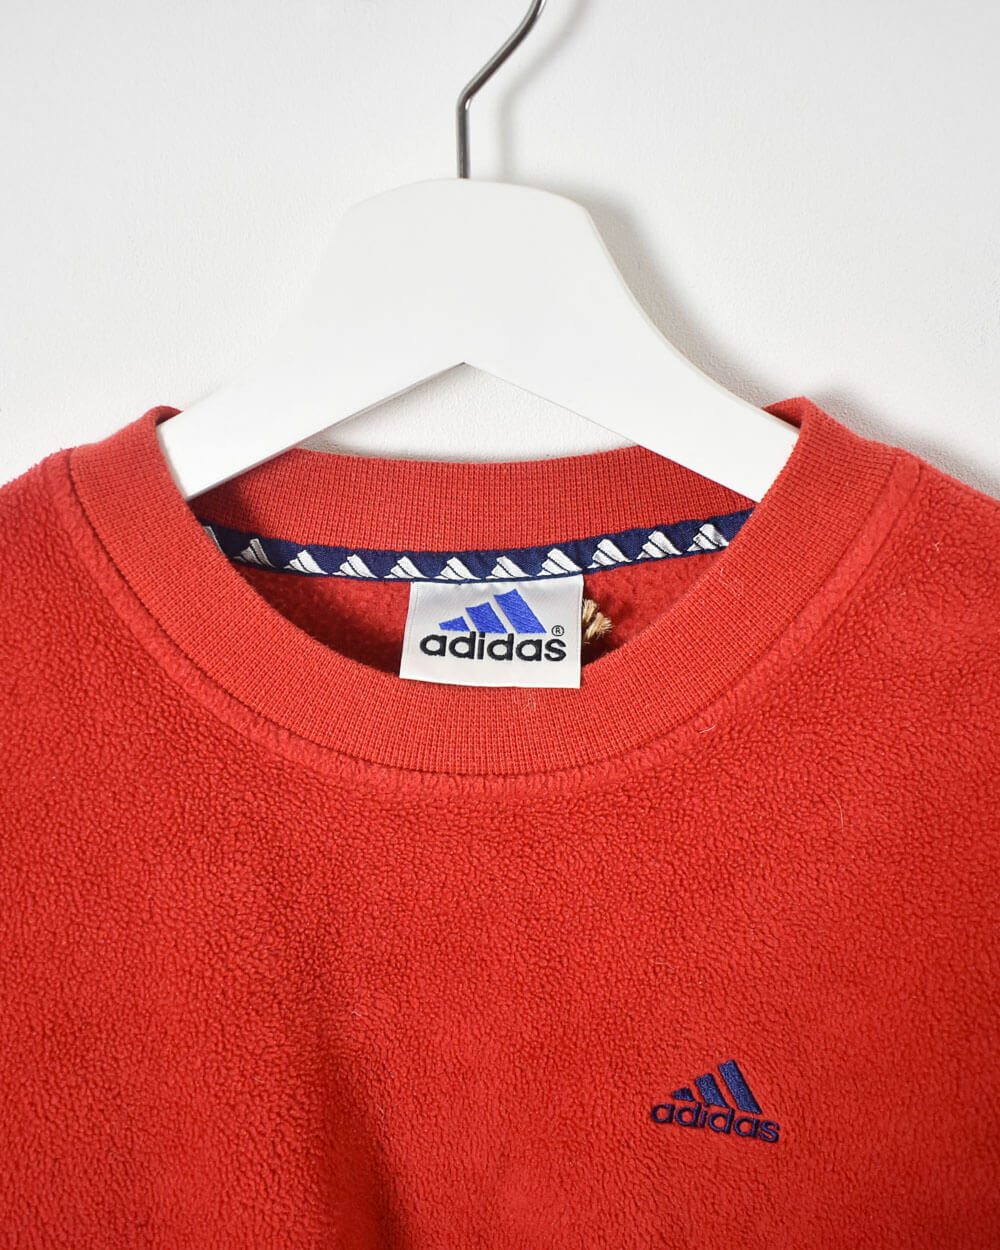 Adidas Pullover Fleece - X-Small - Domno Vintage 90s, 80s, 00s Retro and Vintage Clothing 